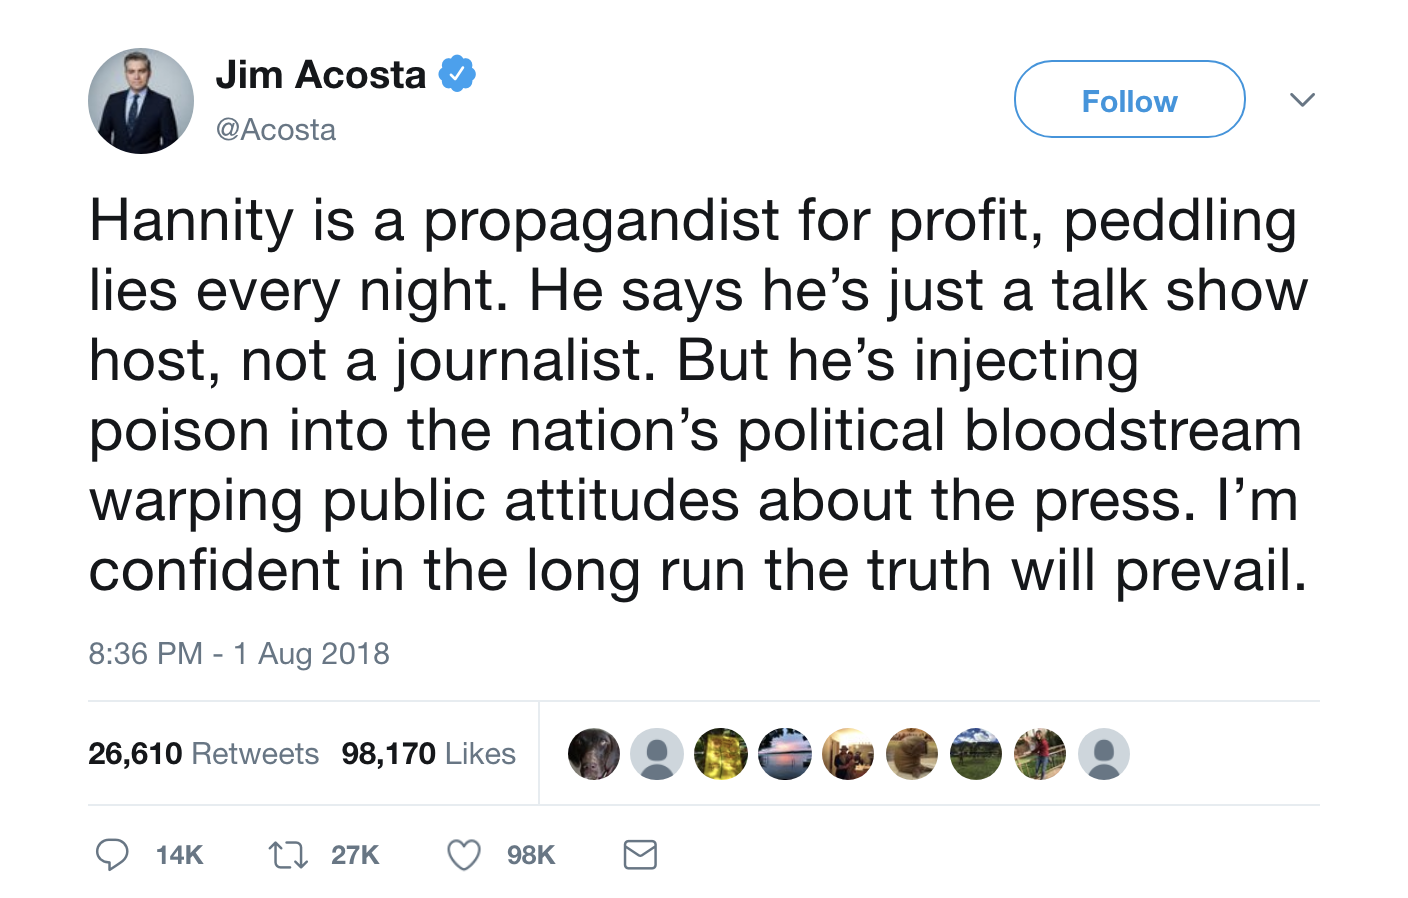 Screen-Shot-2018-08-02-at-8.38.29-AM CNN's Jim Acosta Humiliates Hannity On Twitter - Sean Goes Full Crybaby Like A Wimp Corruption Crime Election 2018 Media Politics Top Stories 